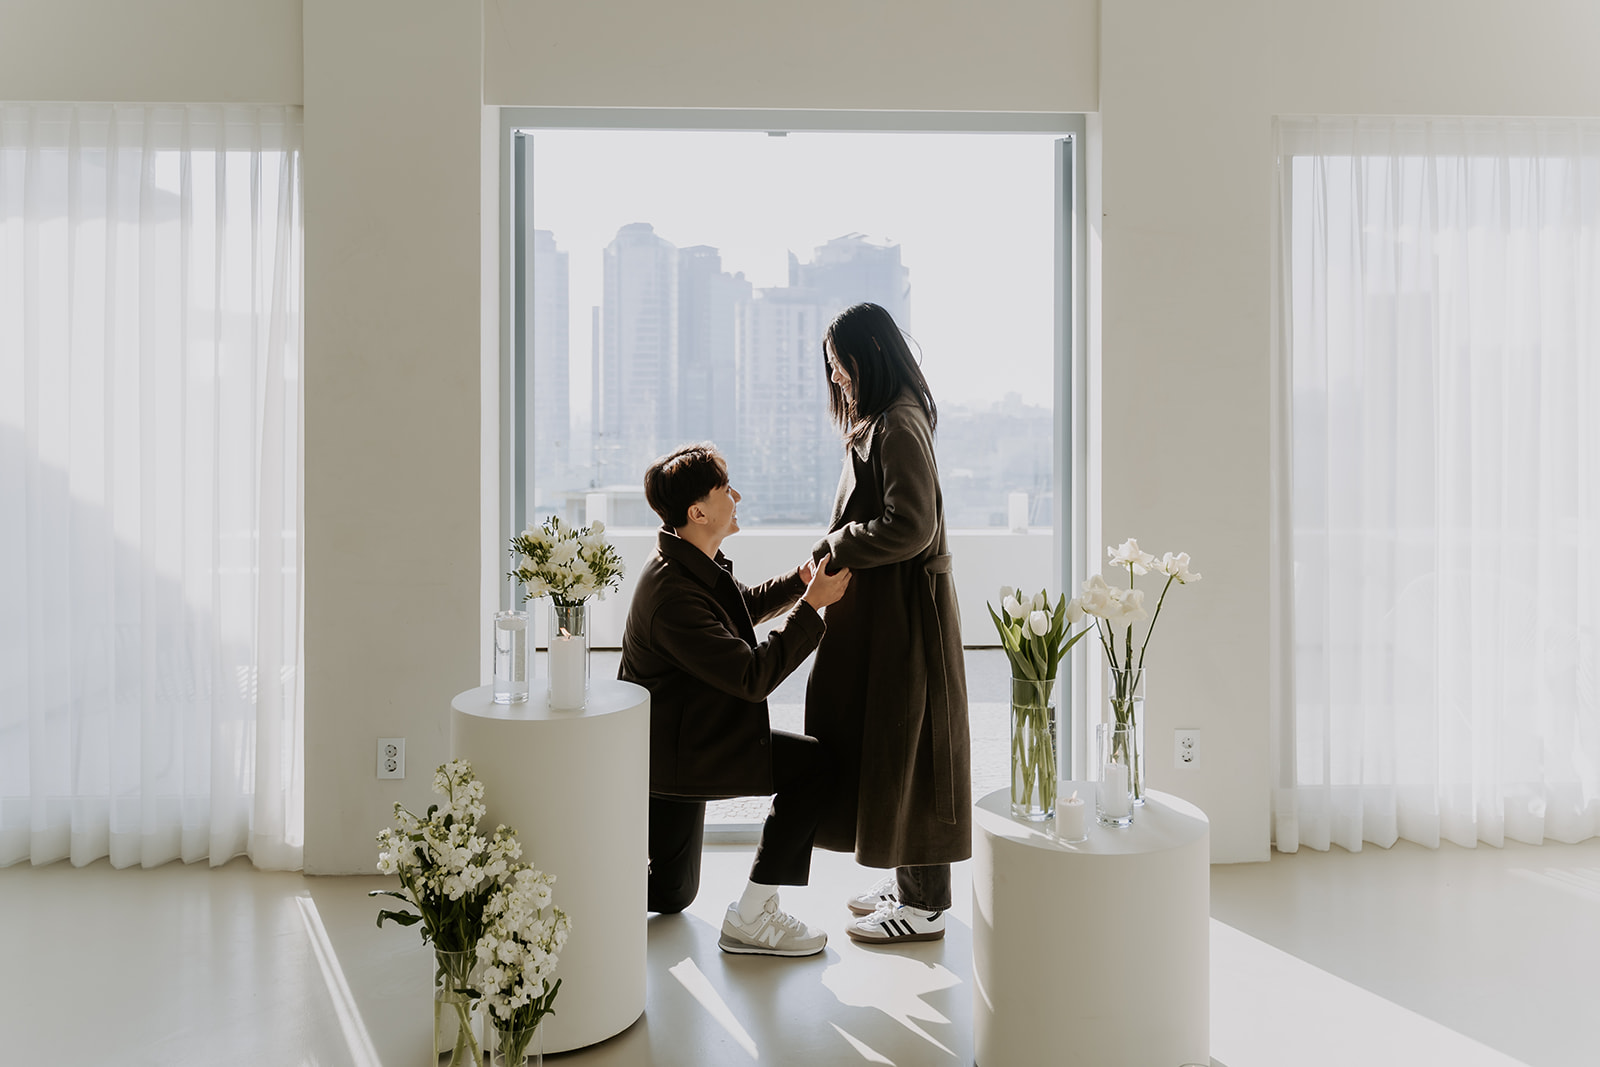 A man proposes to a woman at a photo studio in South Korea